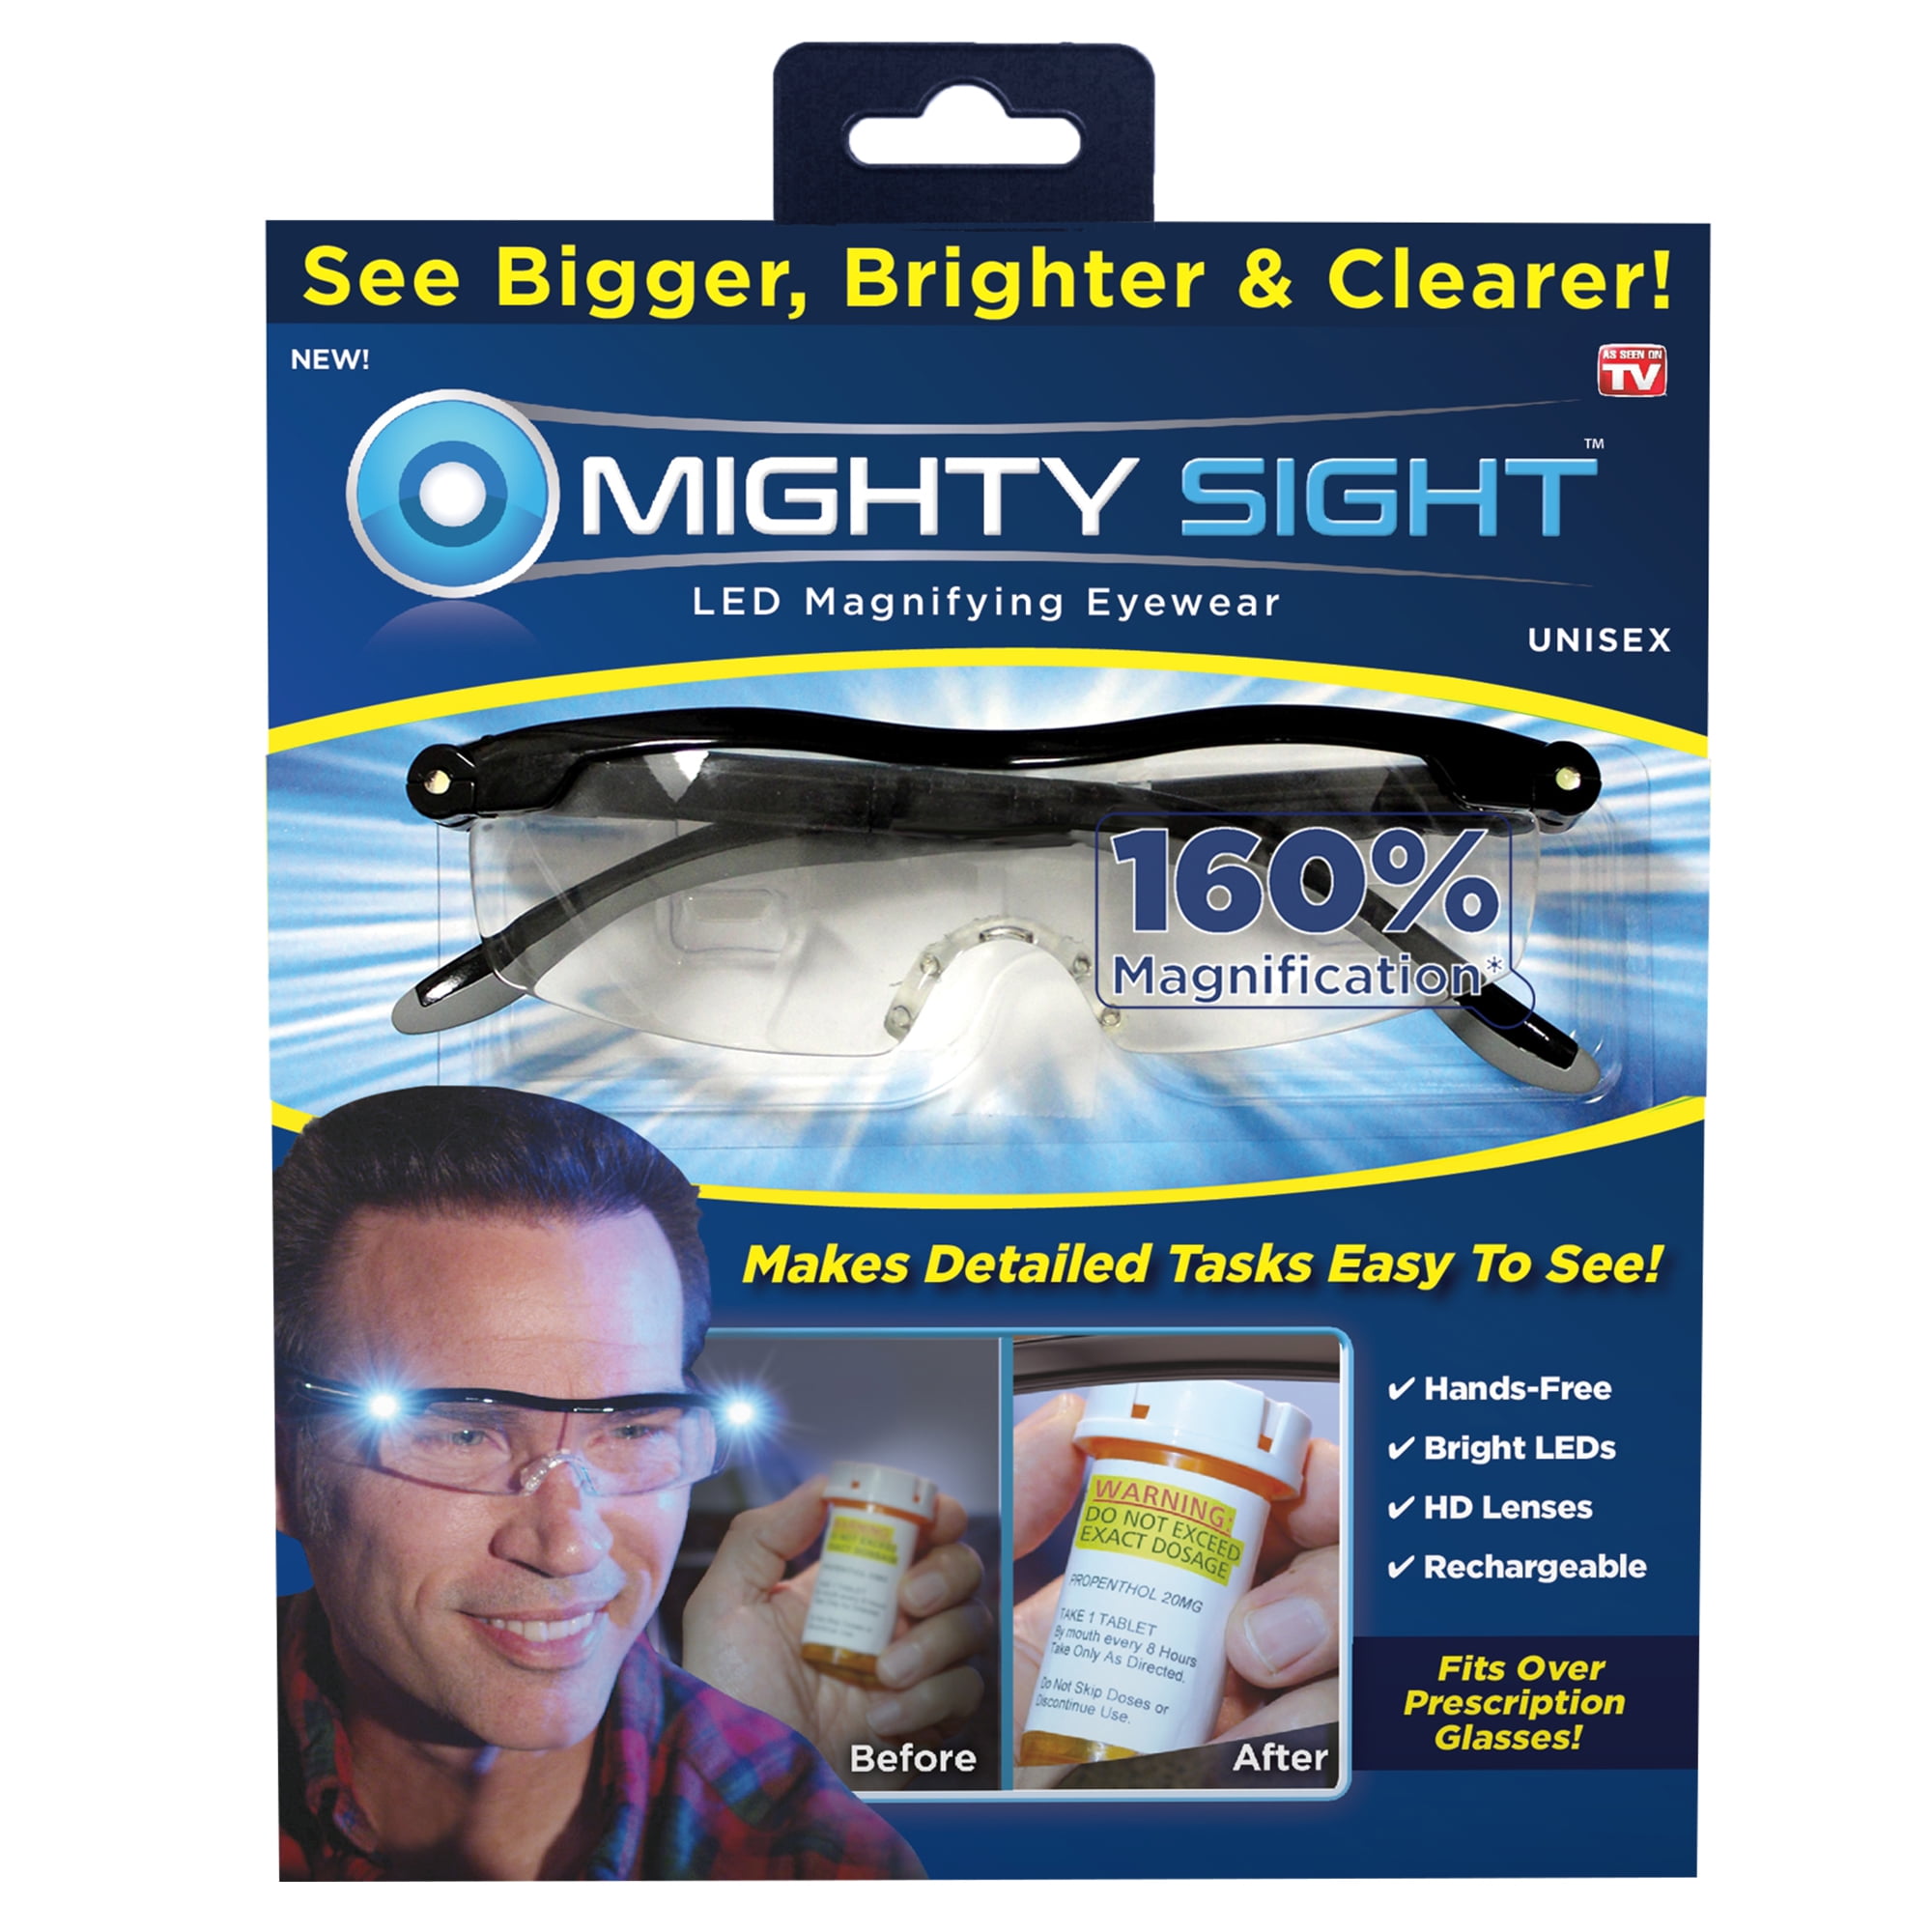 Mighty Sight Led Magnifying Eyewear Fits Over Prescription